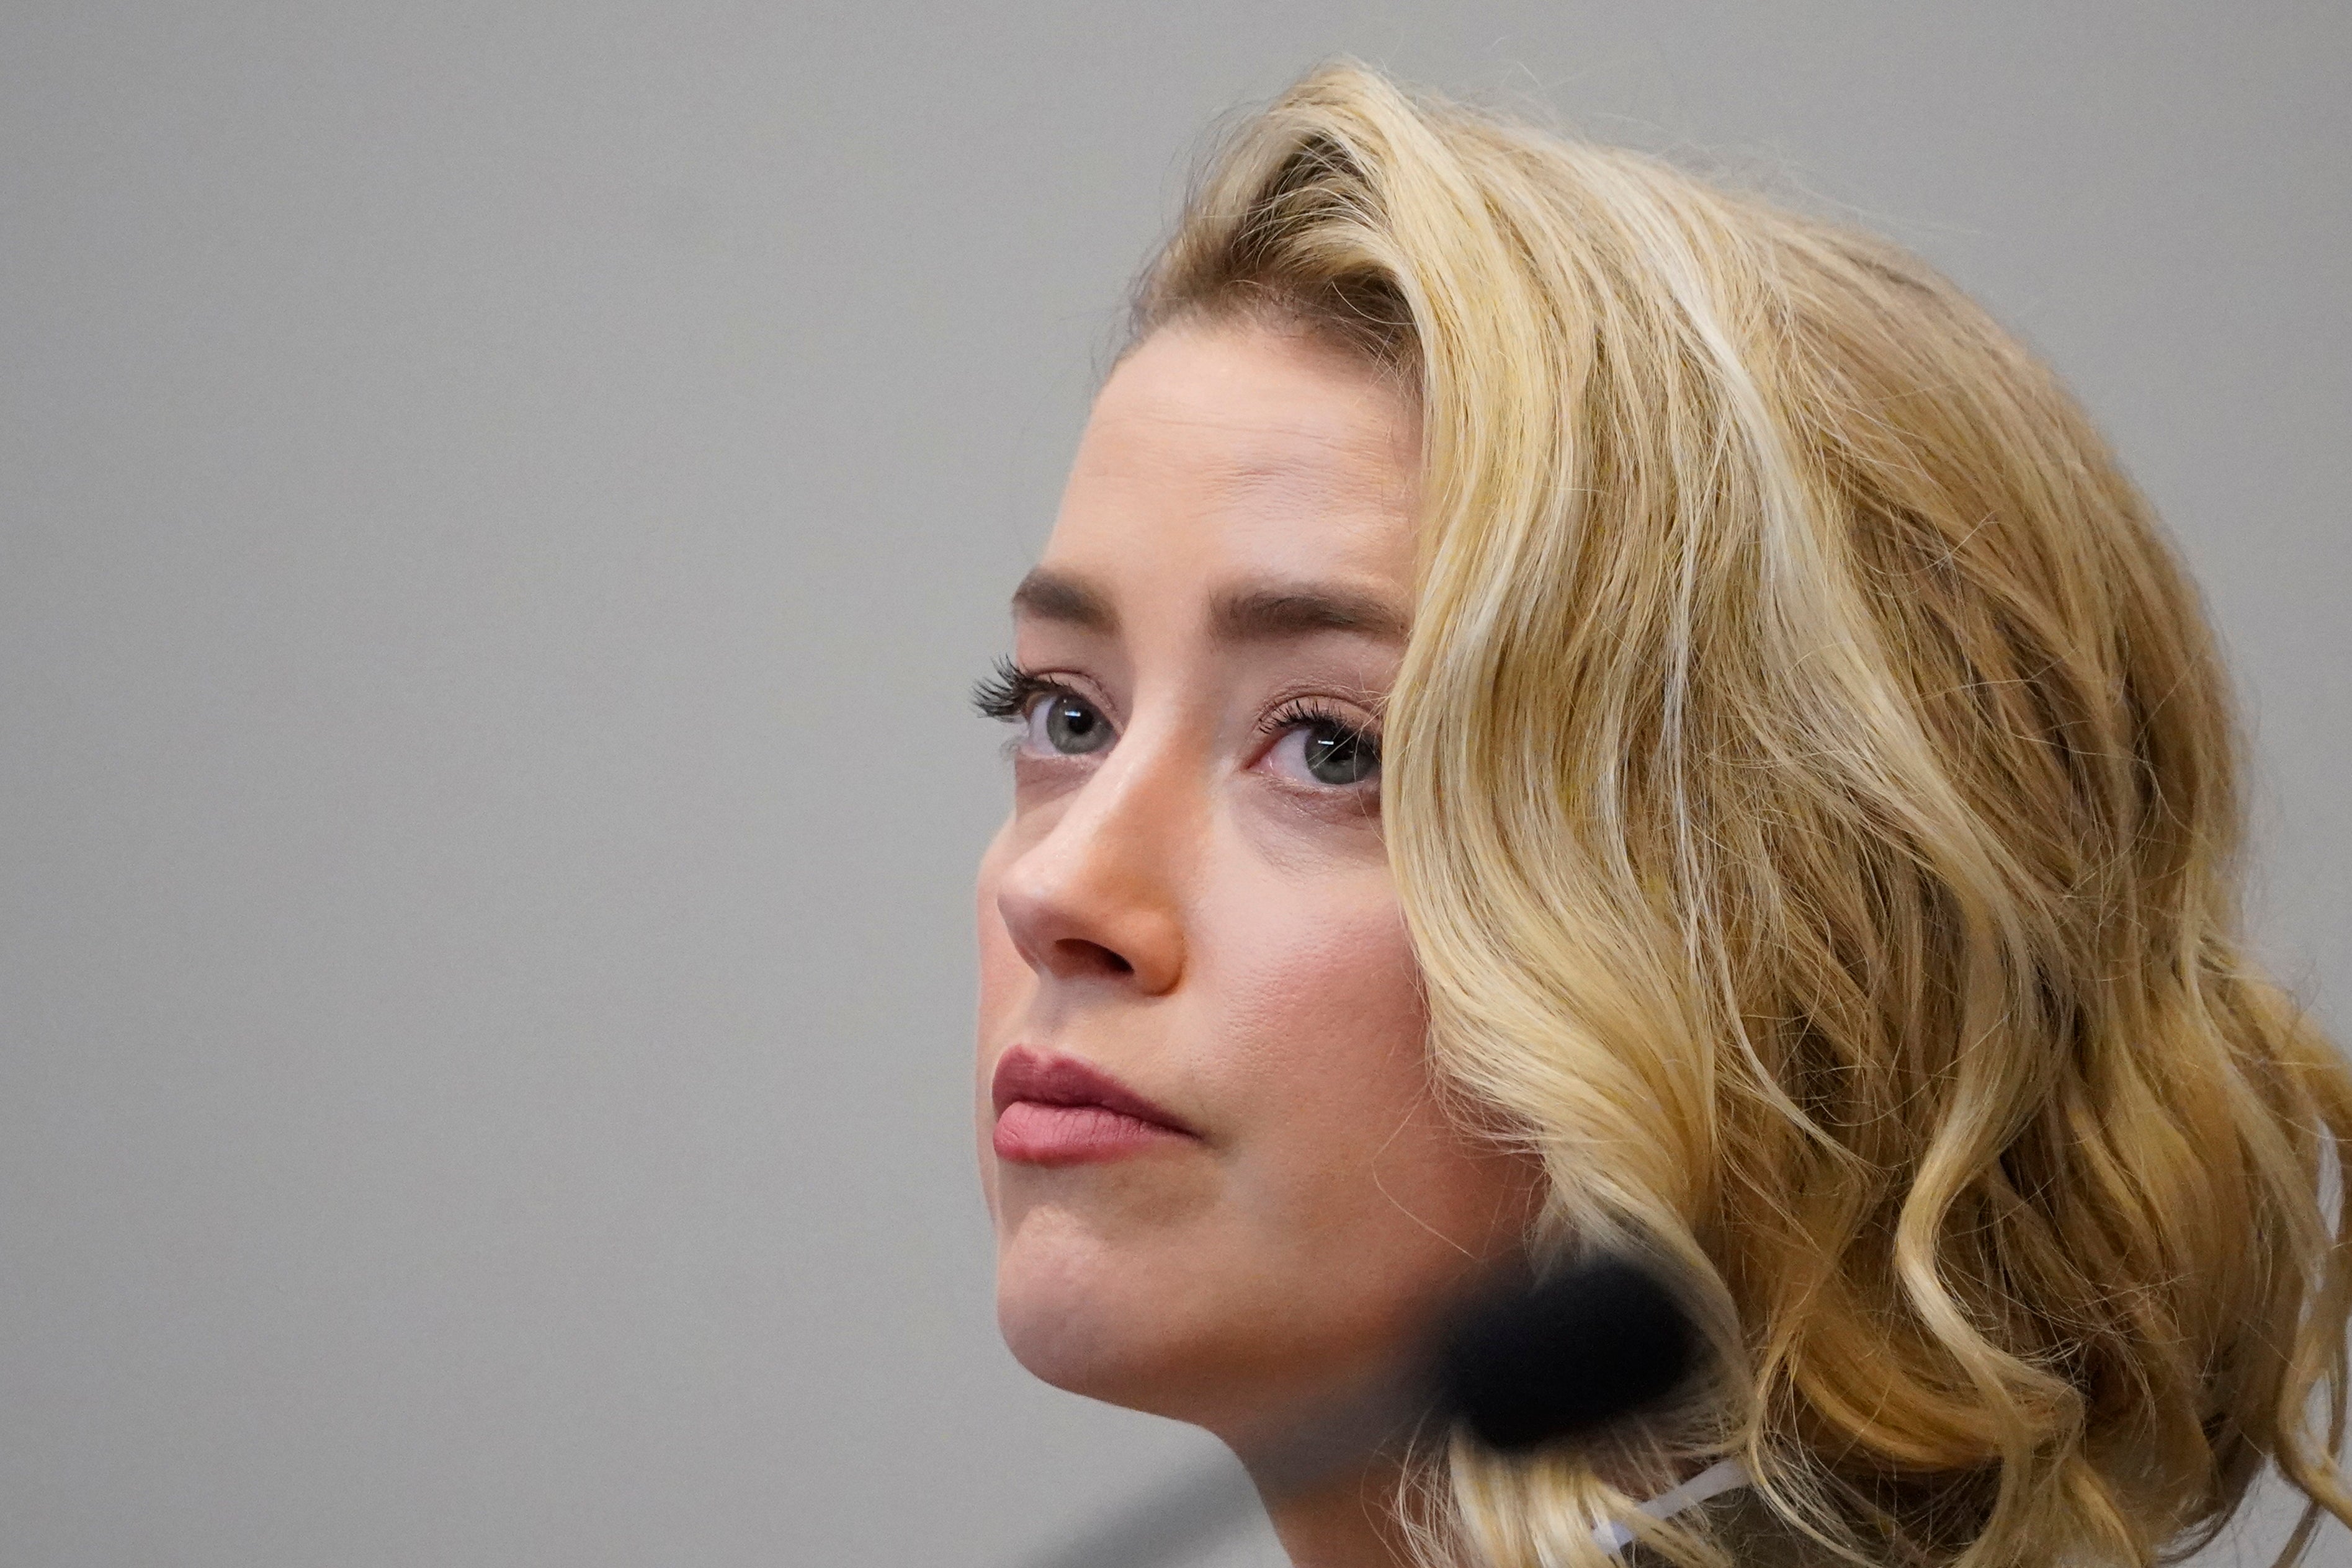 Amber Heard photographed at Virginia’s Fairfax County court house on Monday (23 May)